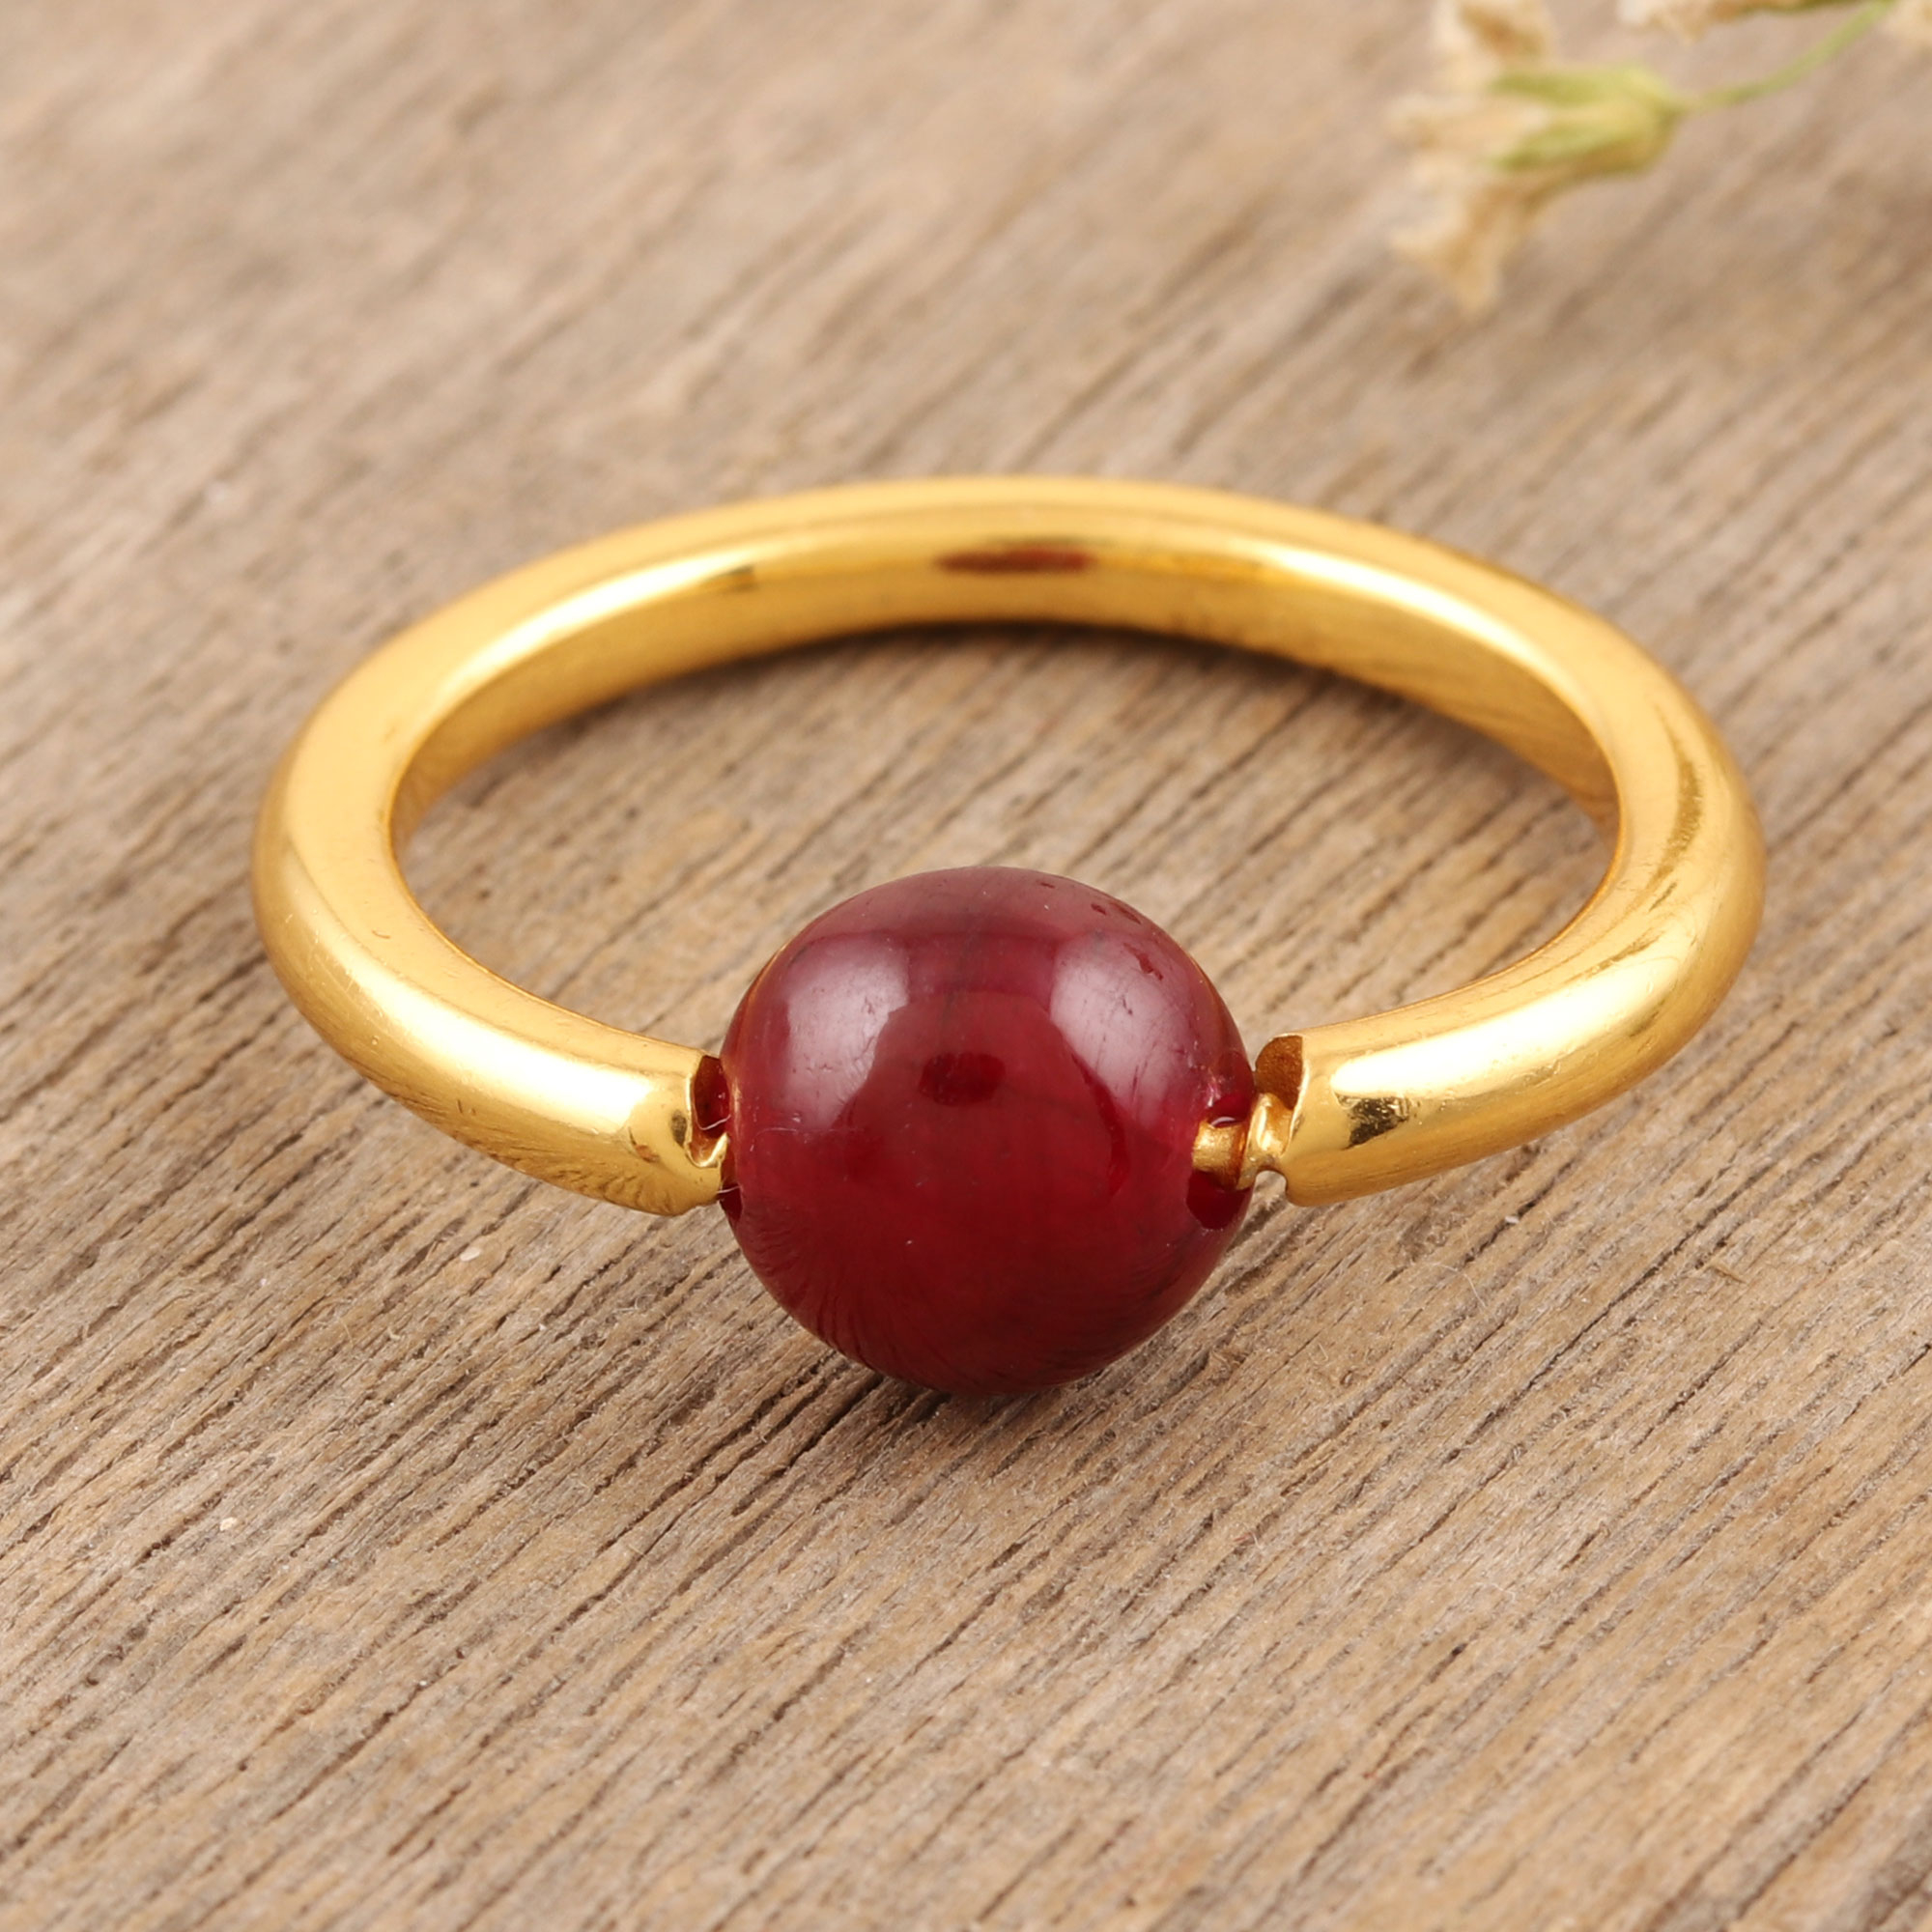 Indian Ethnic Gold Plated Coral Gemstone Ring Size 7 Lovely Men Women Jewelry 